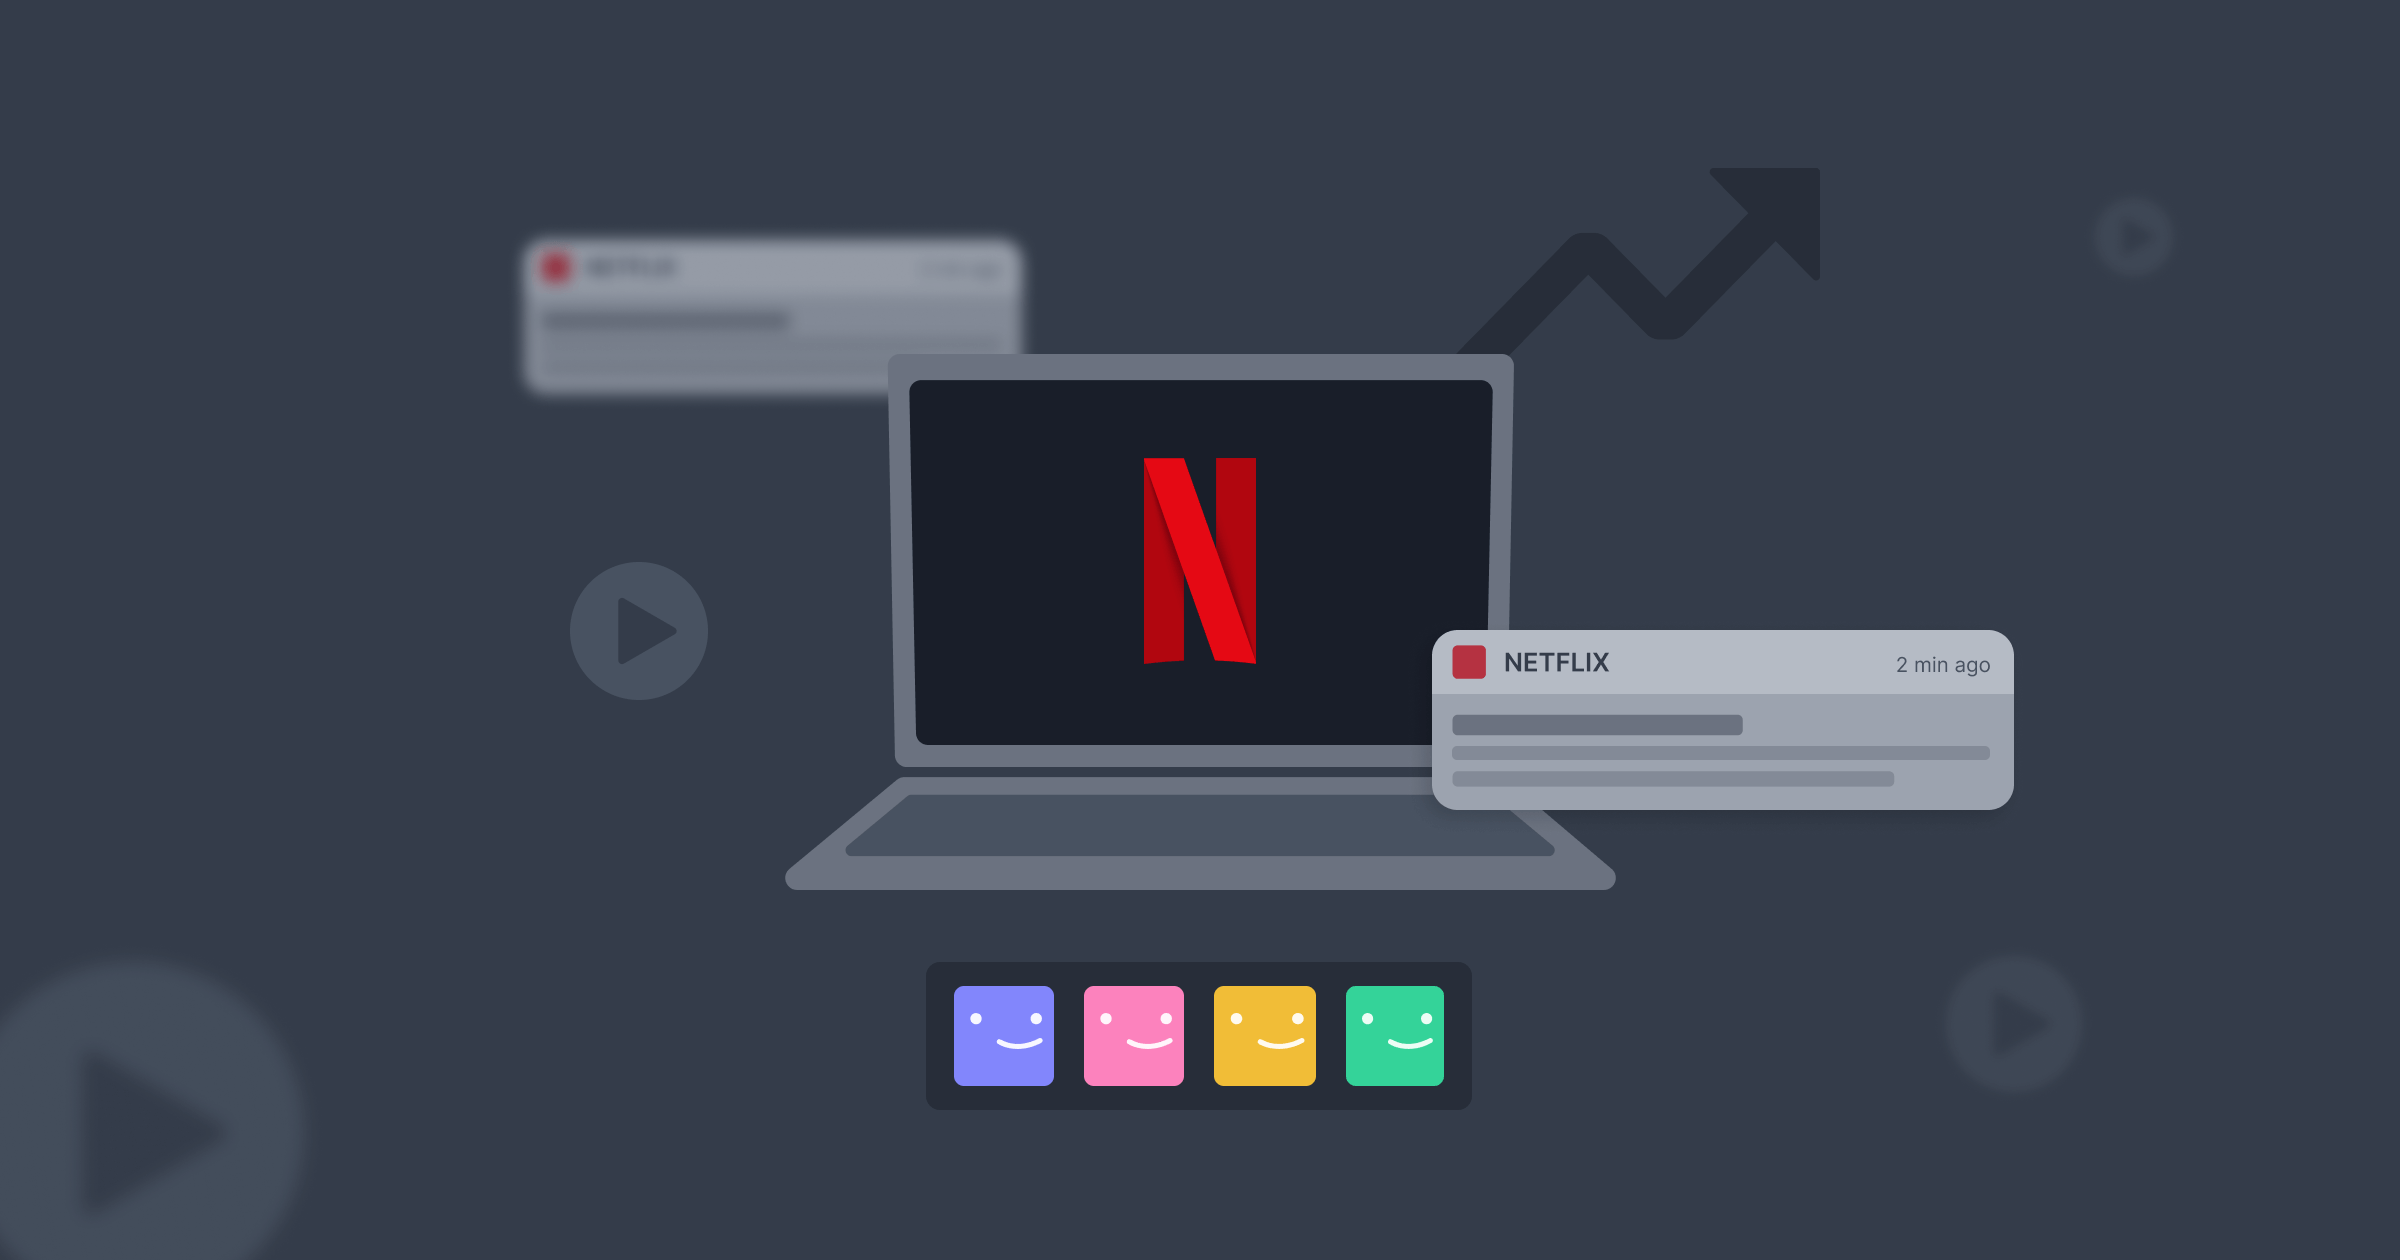 A notebook connecting to Netflix surrounded by an arrow indicating the increase in CRO and a push notification, one of the company's CRO triggers